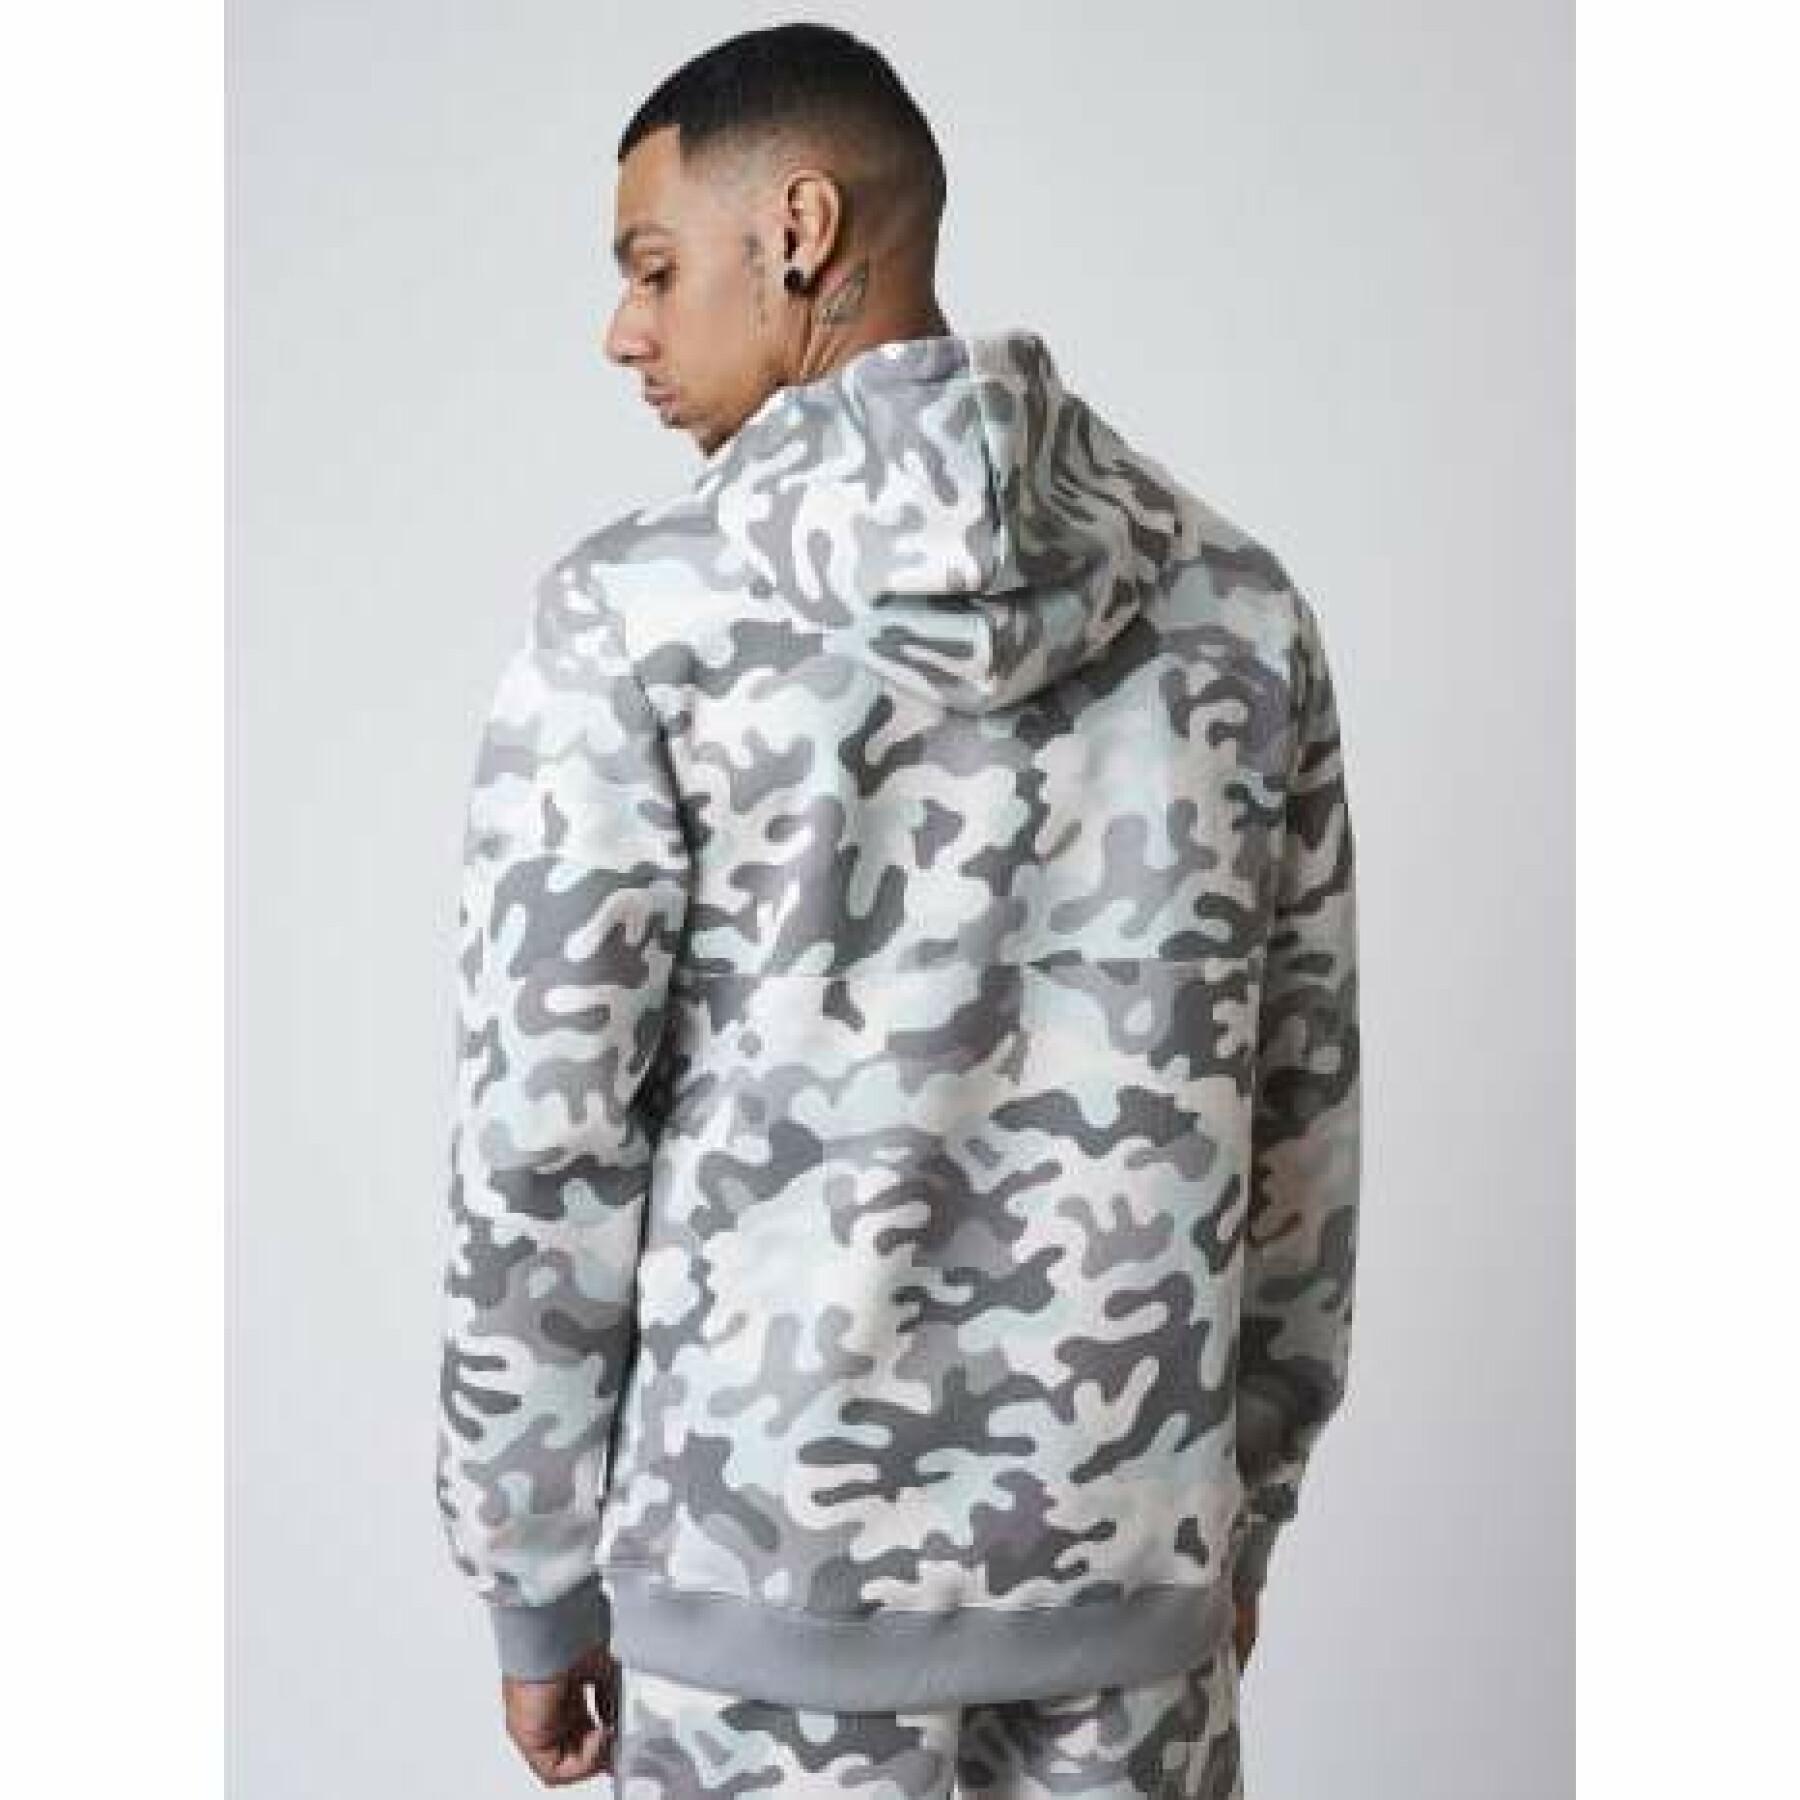 Hoodie print camouflage pockets reflect Project X Paris